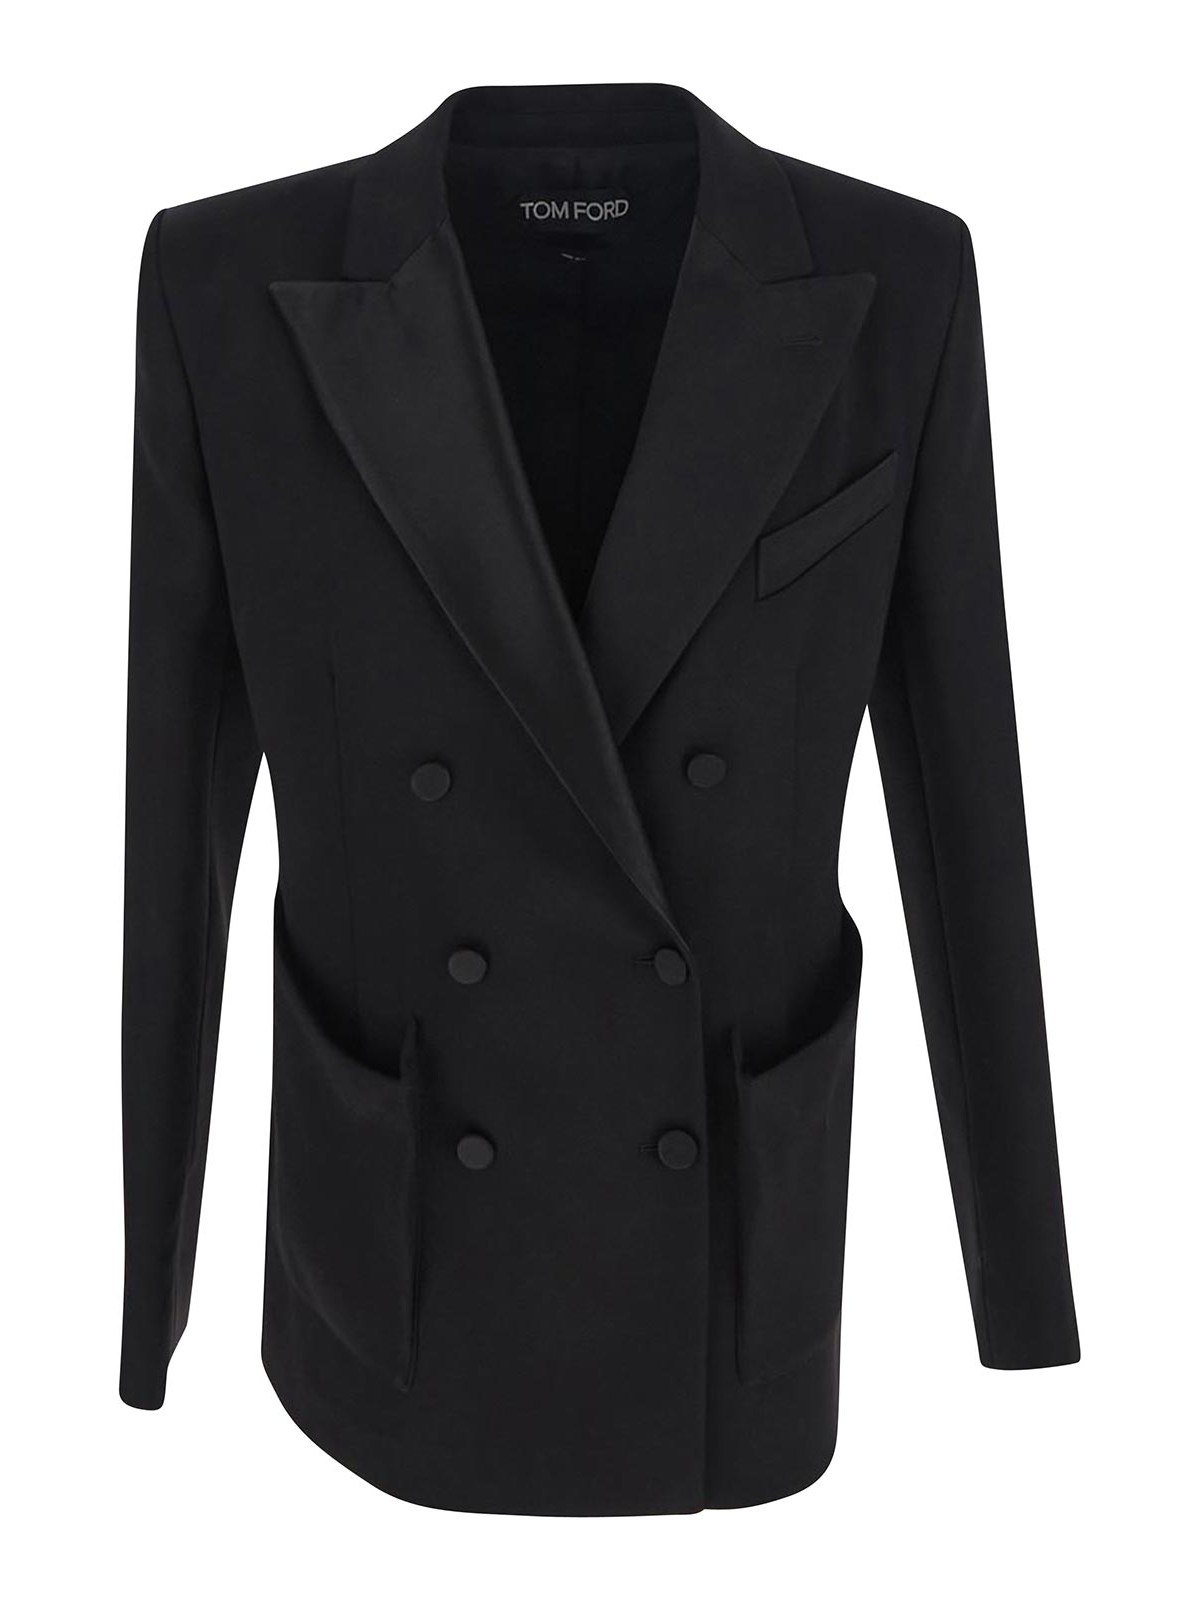 Tom Ford Black Jacket With Long Sleeves